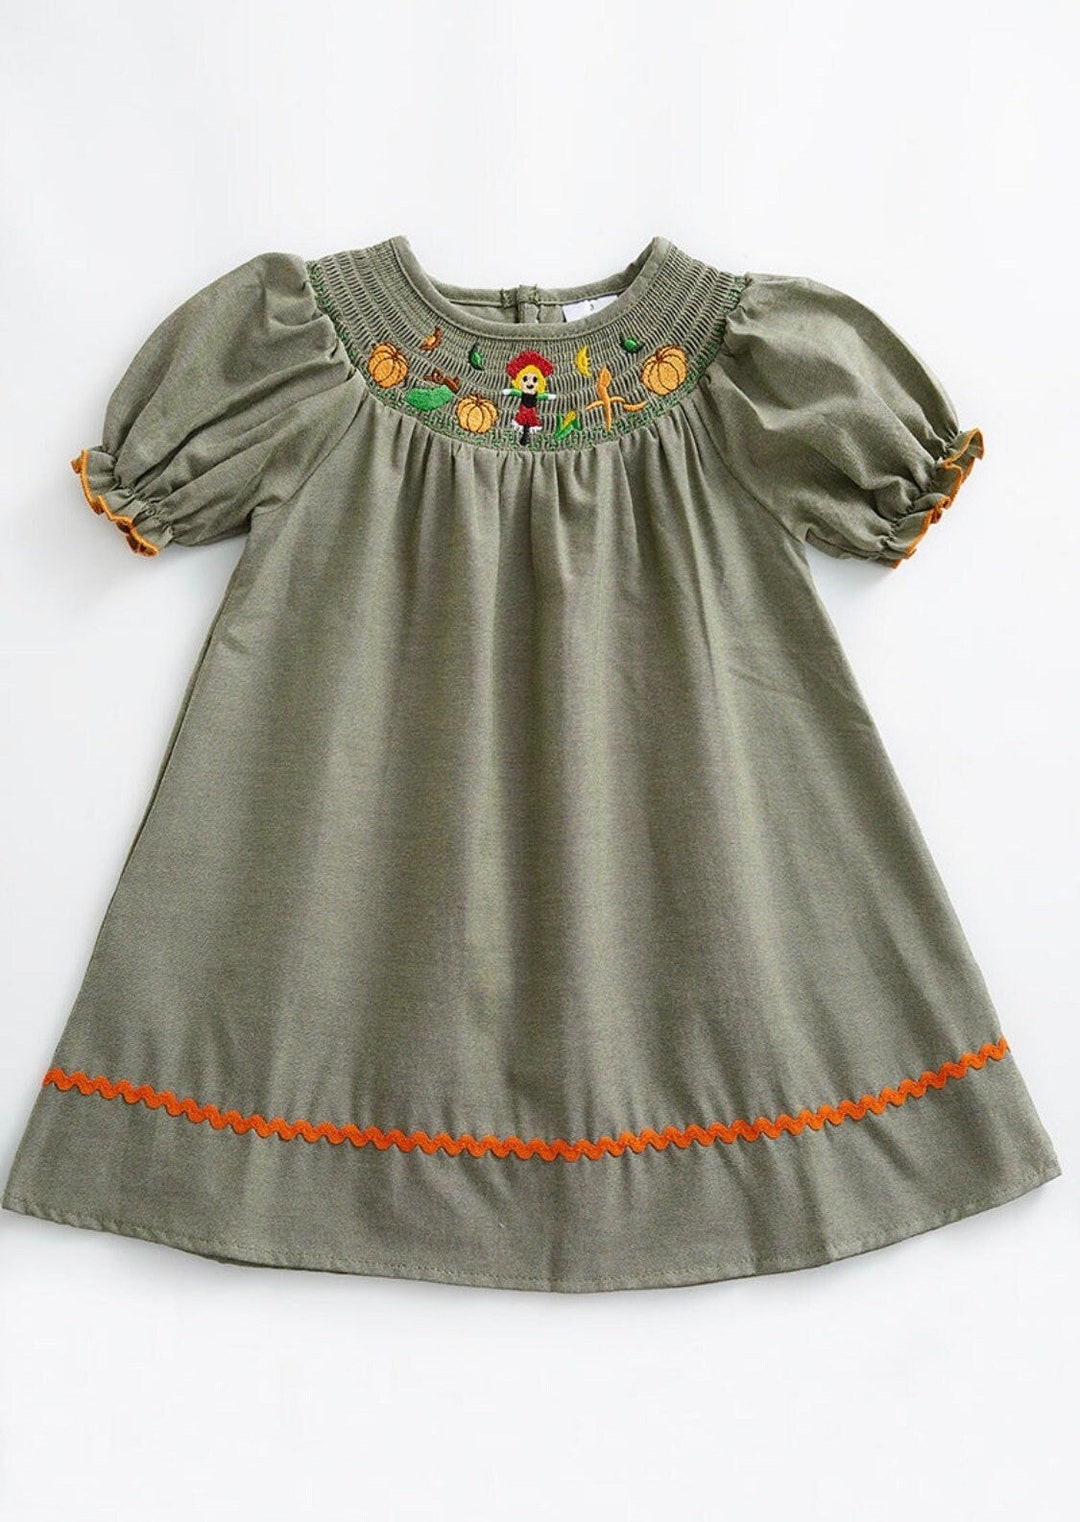 Girls Smocked Fall Dress With Embroidered Scarecrow & - Etsy